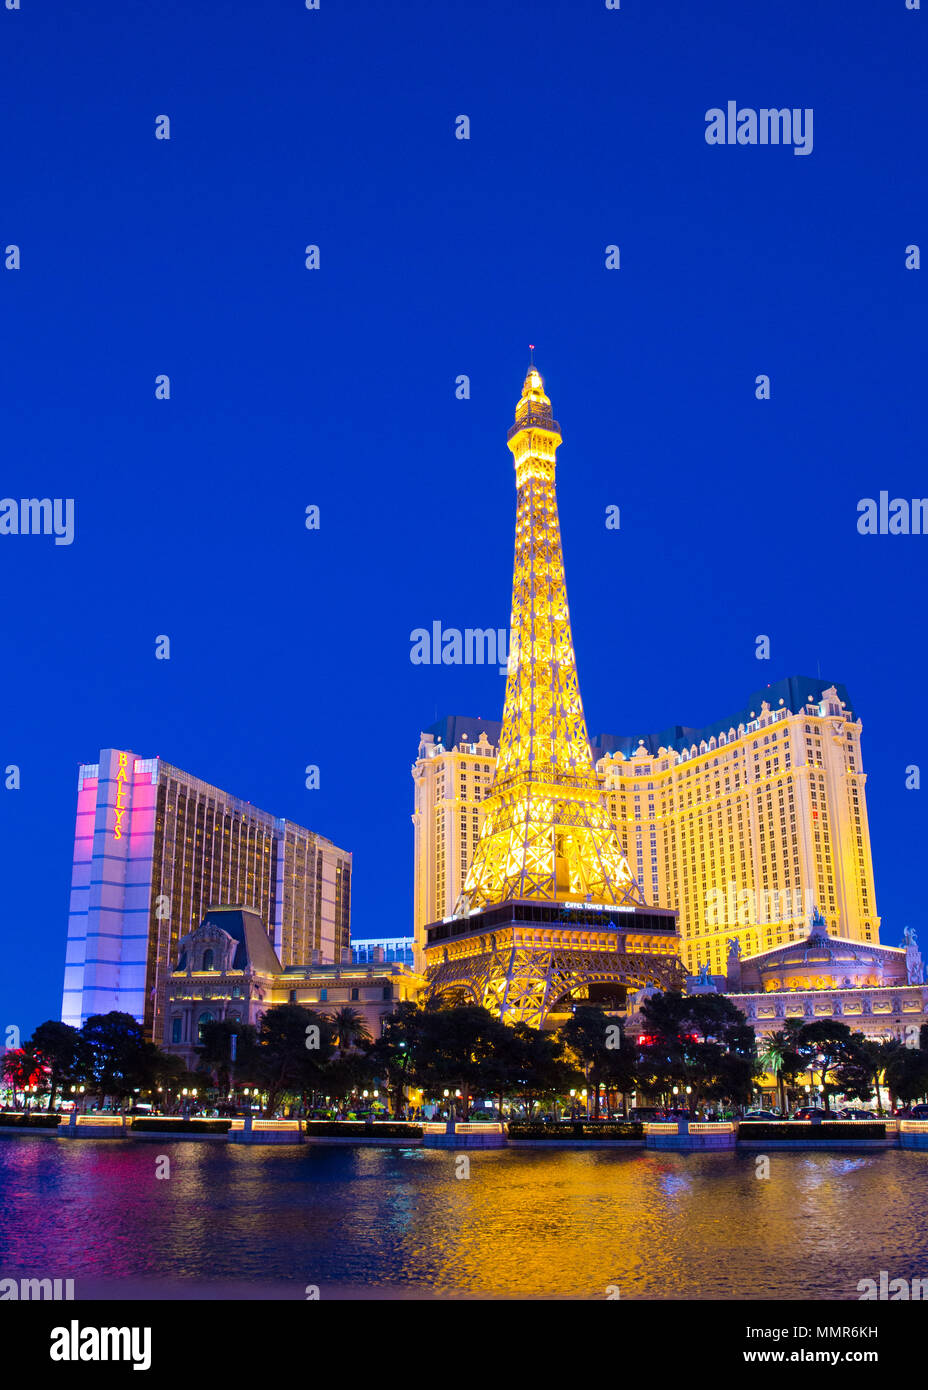 LAS VEGAS, NEVADA - MAY 17, 2017: Beautiful night scene of Paris Las Vegas Resort across water with other hotels and casinos in view. Stock Photo